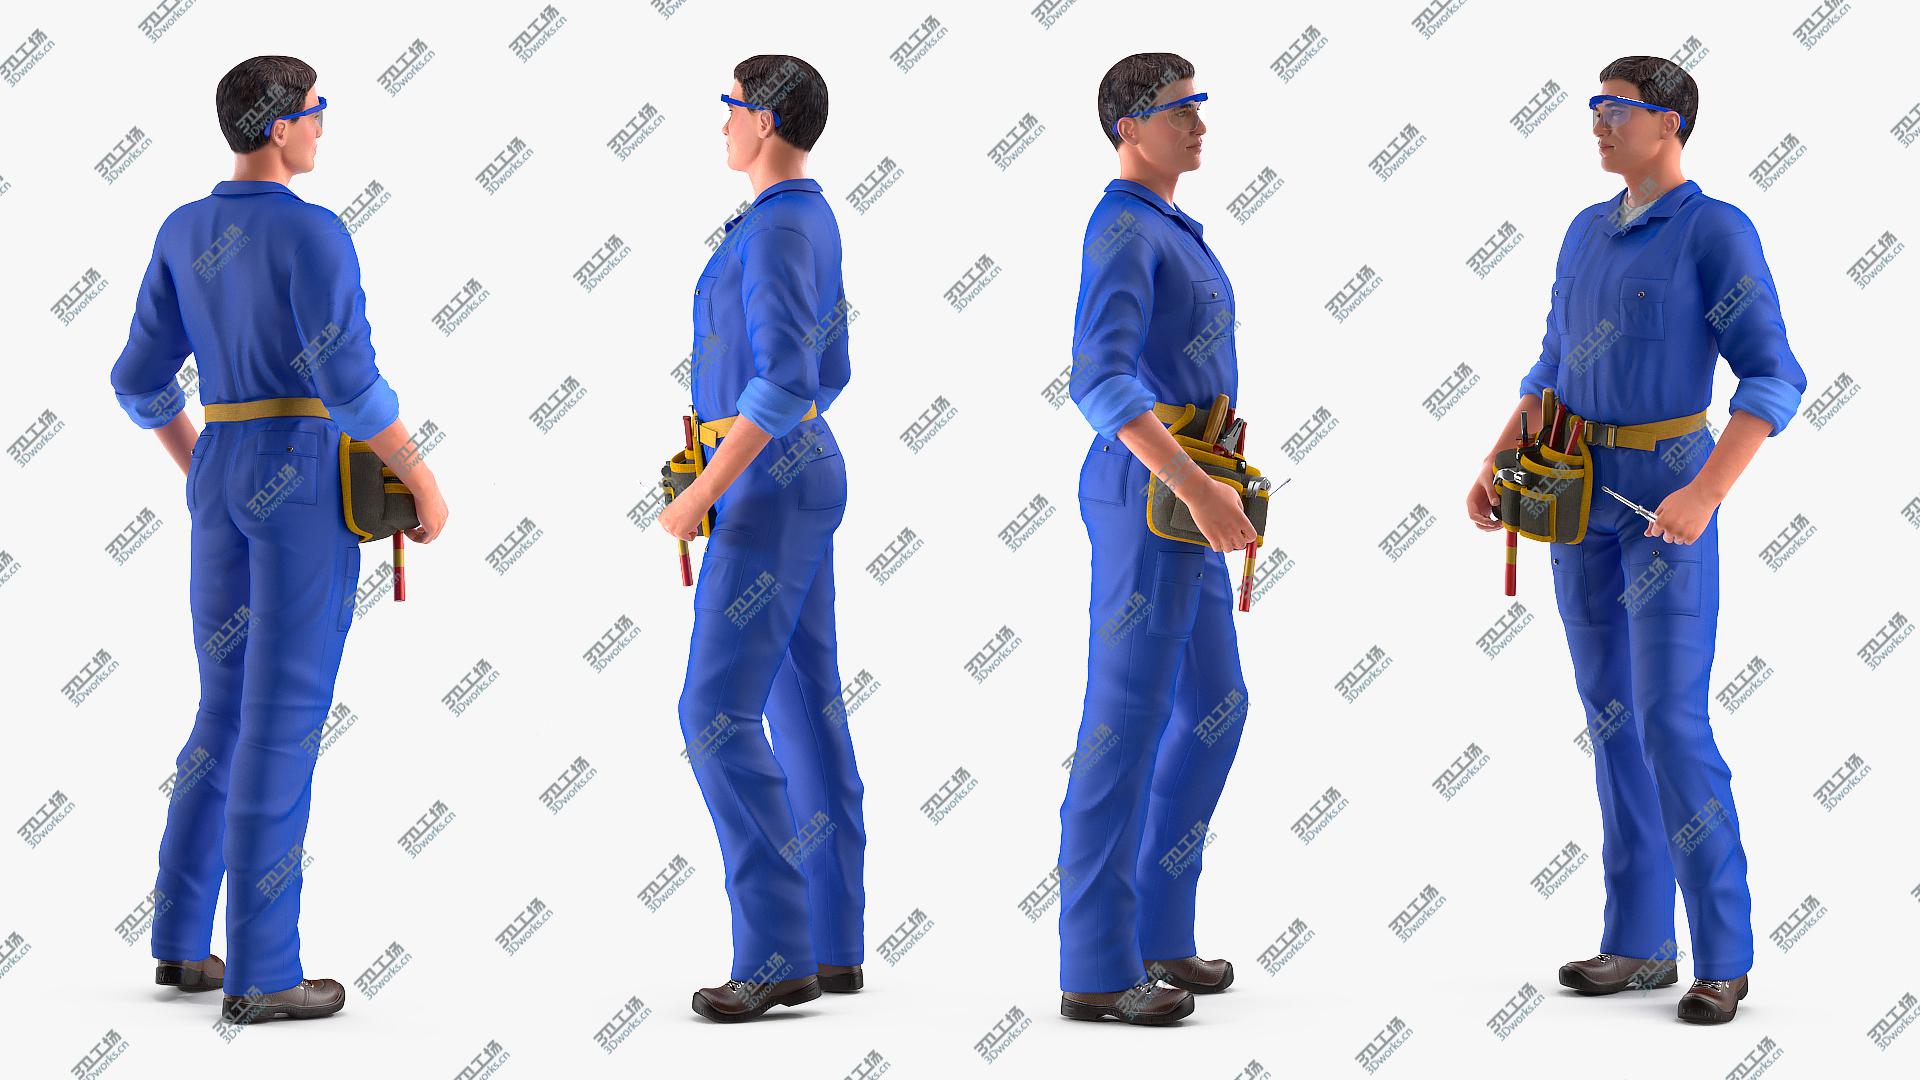 images/goods_img/202104093/3D Electrician Standing Pose model/1.jpg